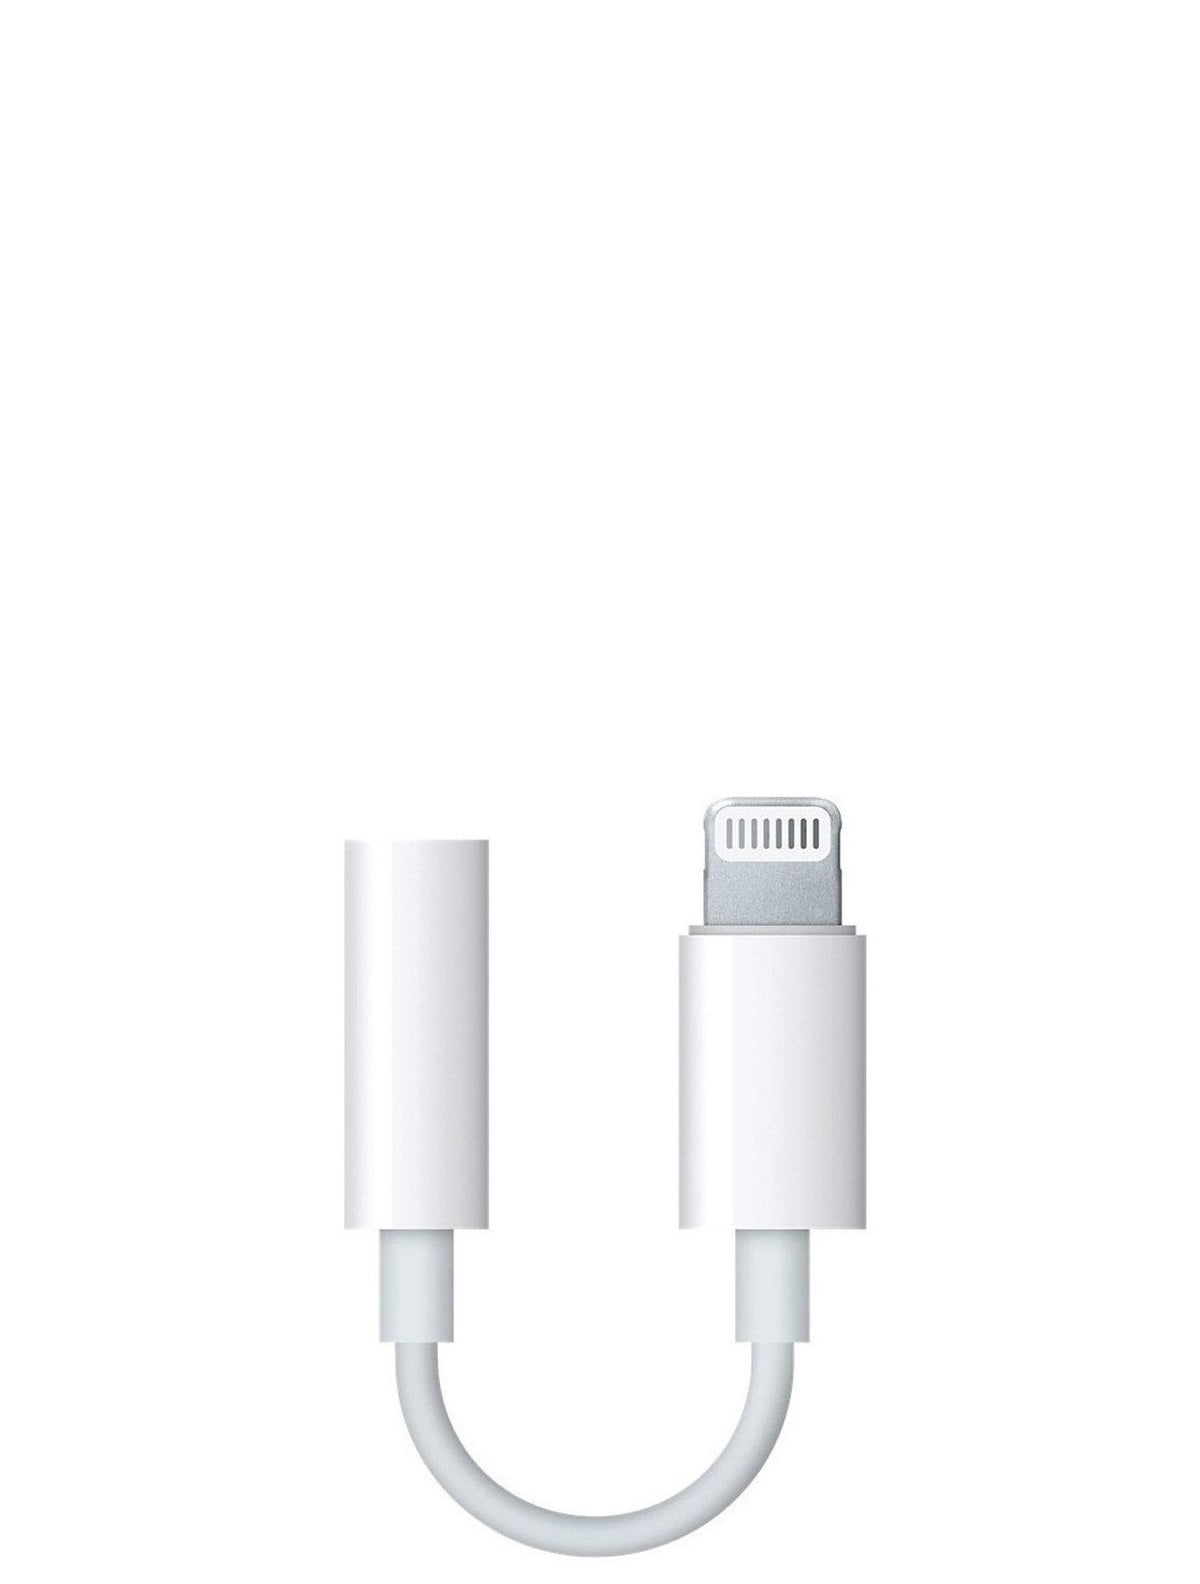 https://caserace.net/products/apple-lightning-to-3-5-headphone-jack-adapter-with-paking